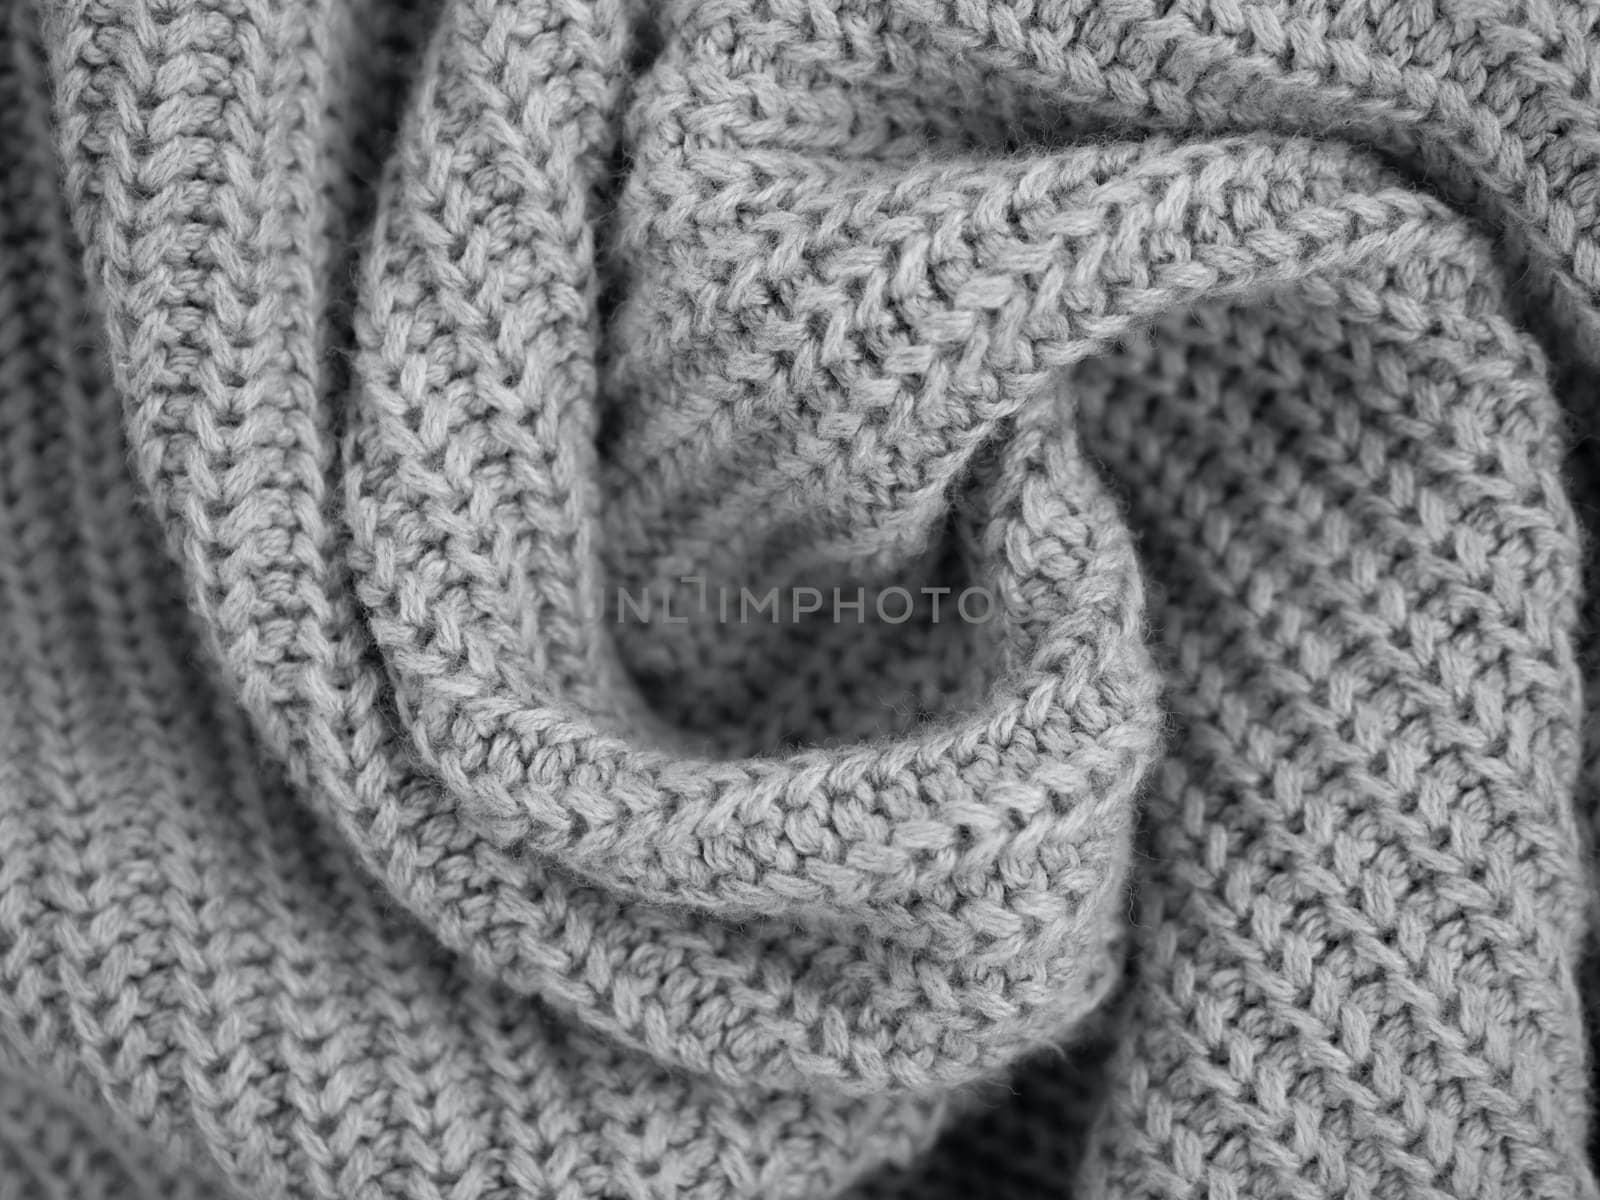 Wavy folds material. Knitted warm ultimate gray sweater or scarf. Cozy composition in the home atrosphere. Trendy grey wool fabric texture close up background. Comfortable style cloth. Soft focus